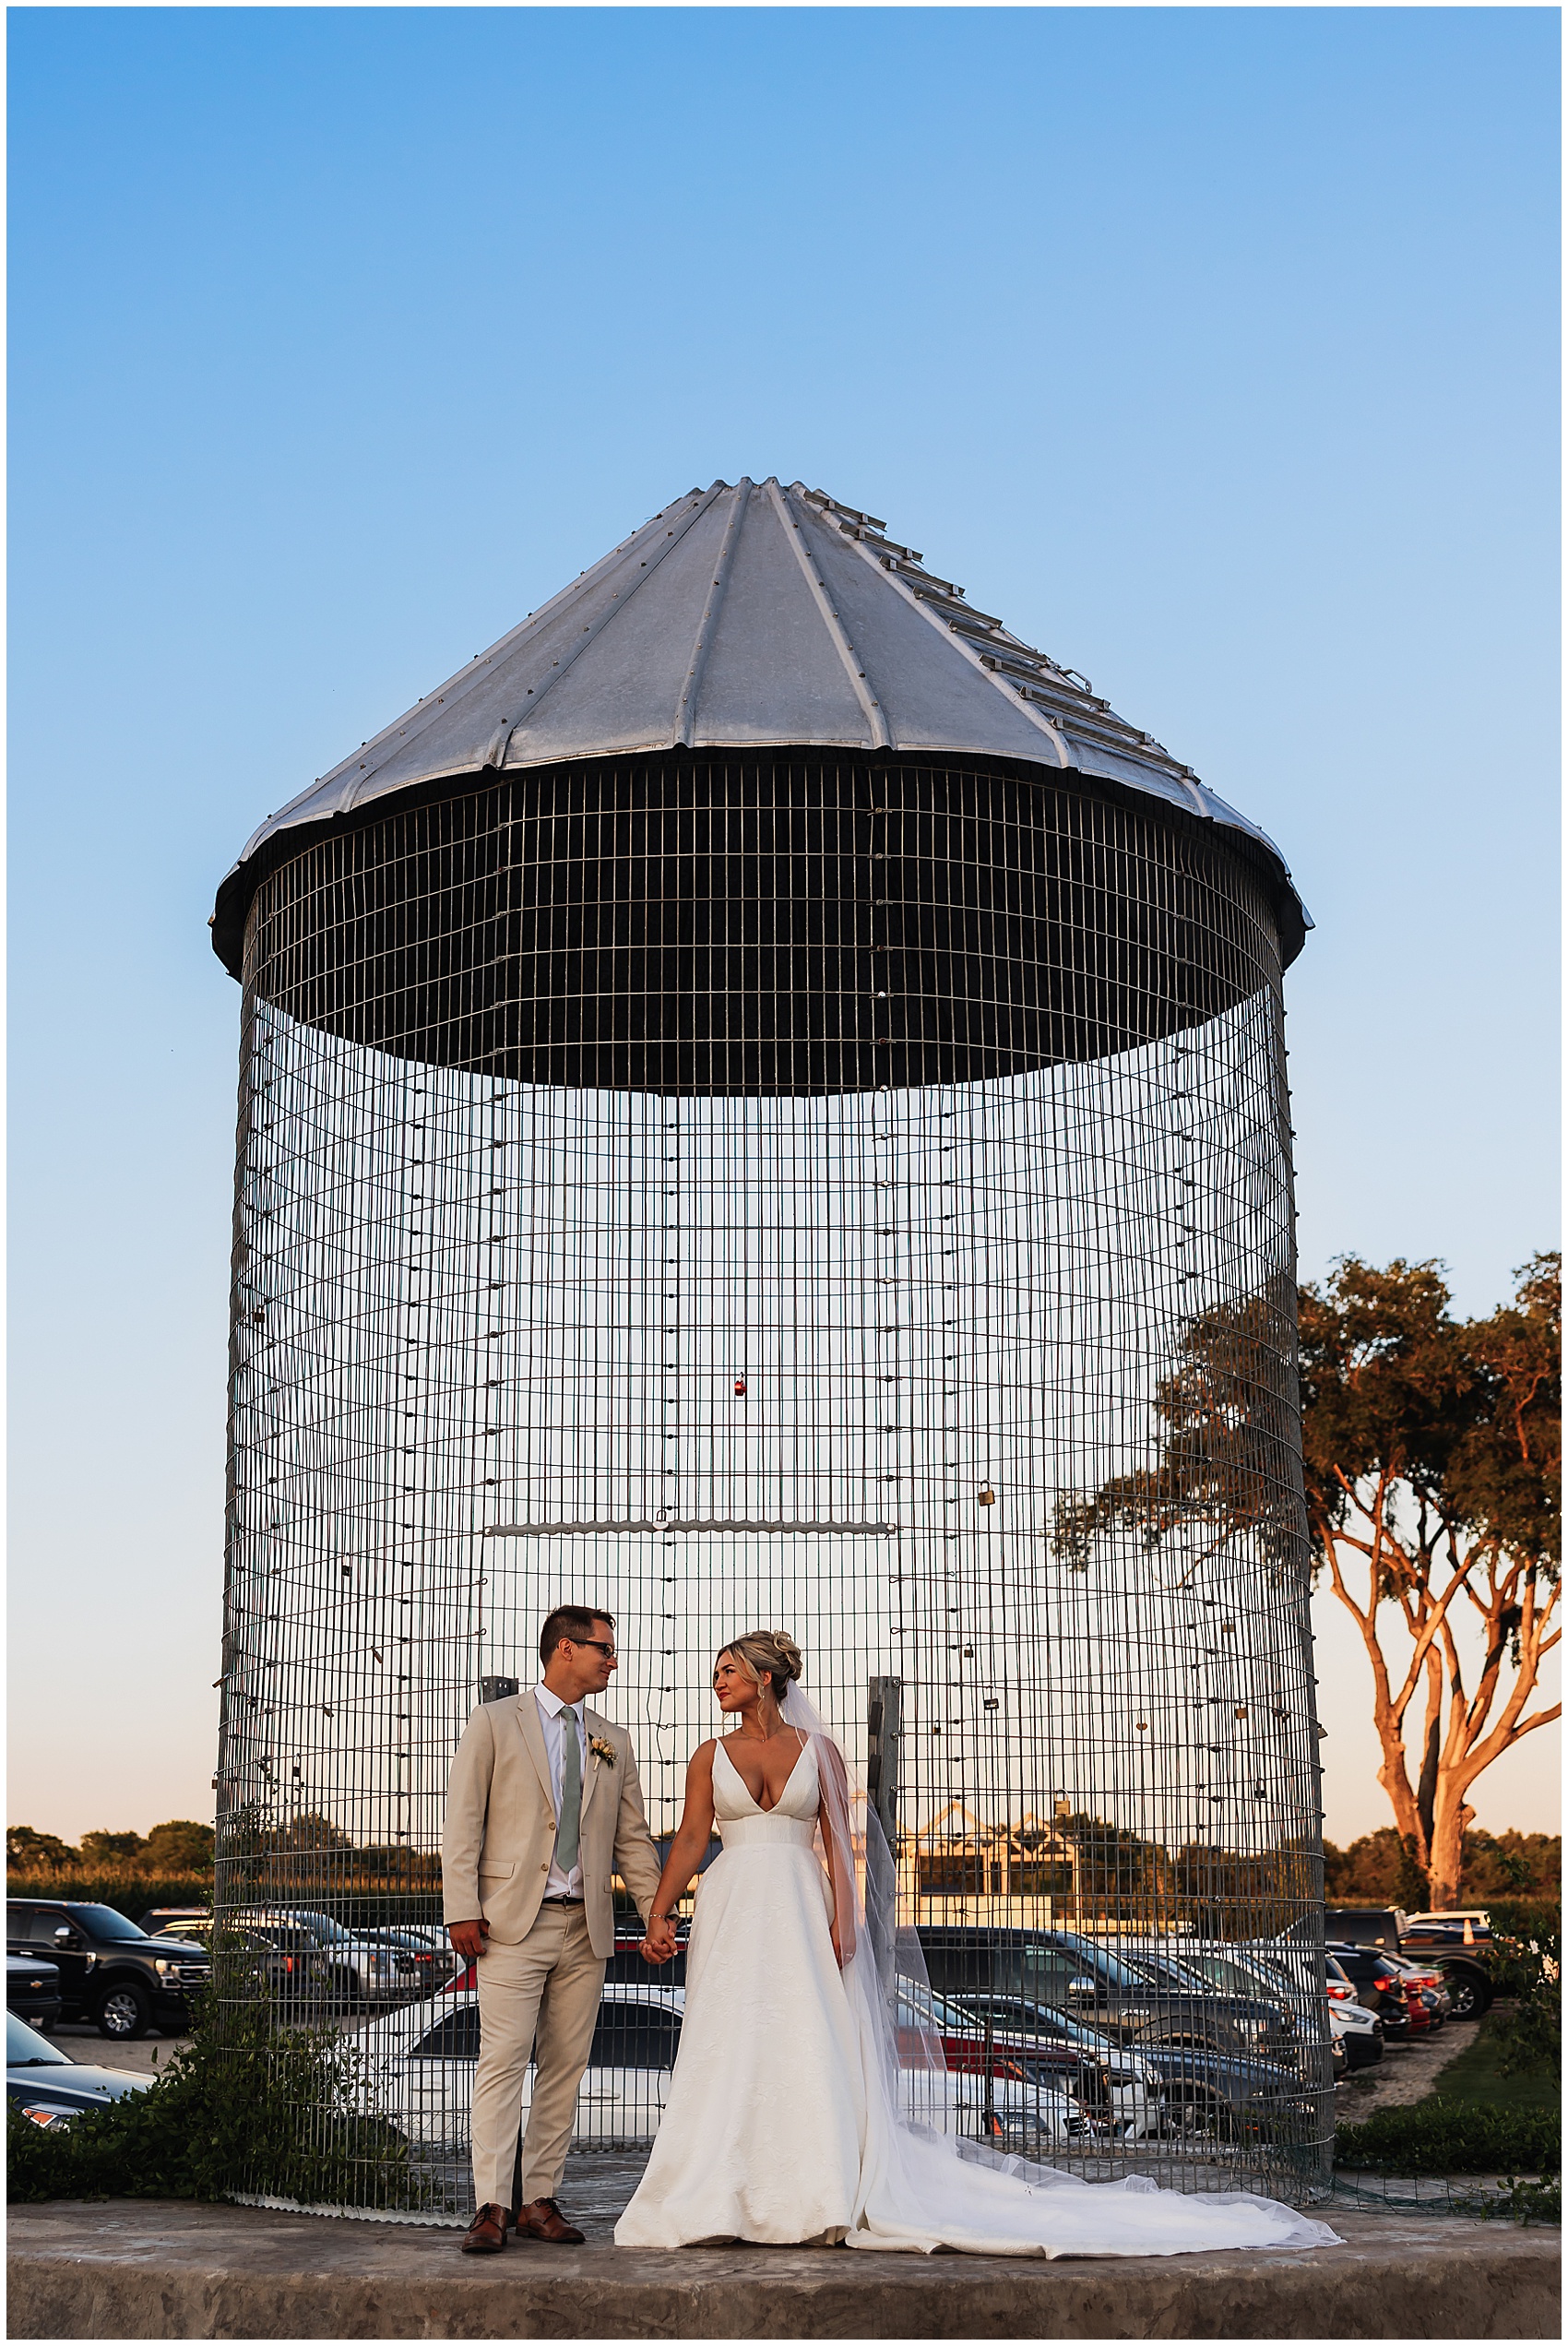 Newlyweds hold hands and gaze at each other while standing in front of a metal wire silo covered with padlocks sable creek homestead